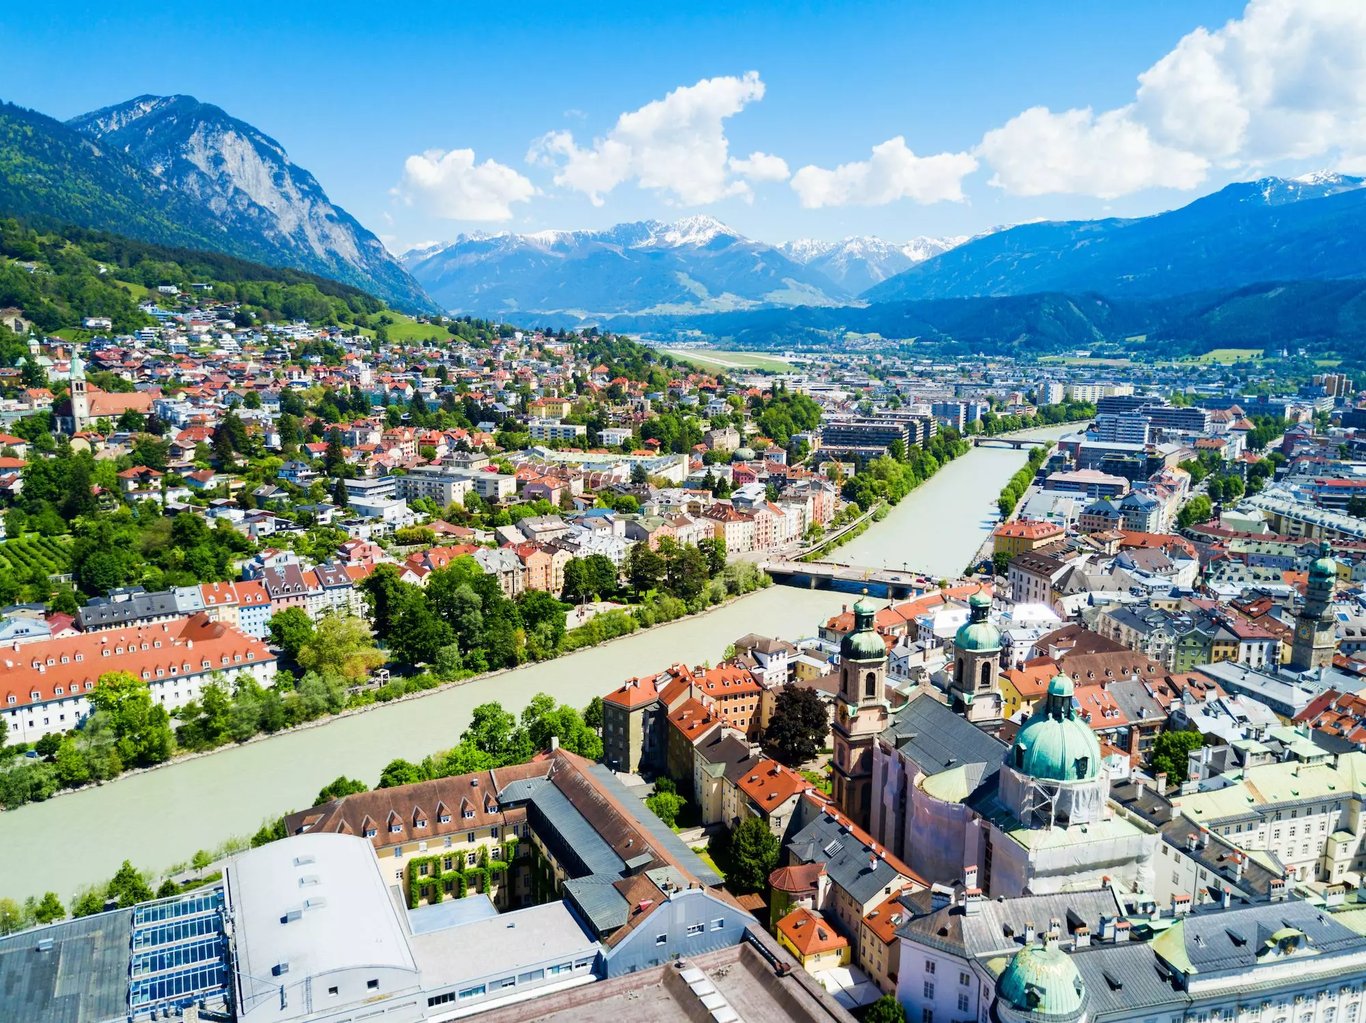 Innsbruck Top 17 Attractions - with maps and pictures